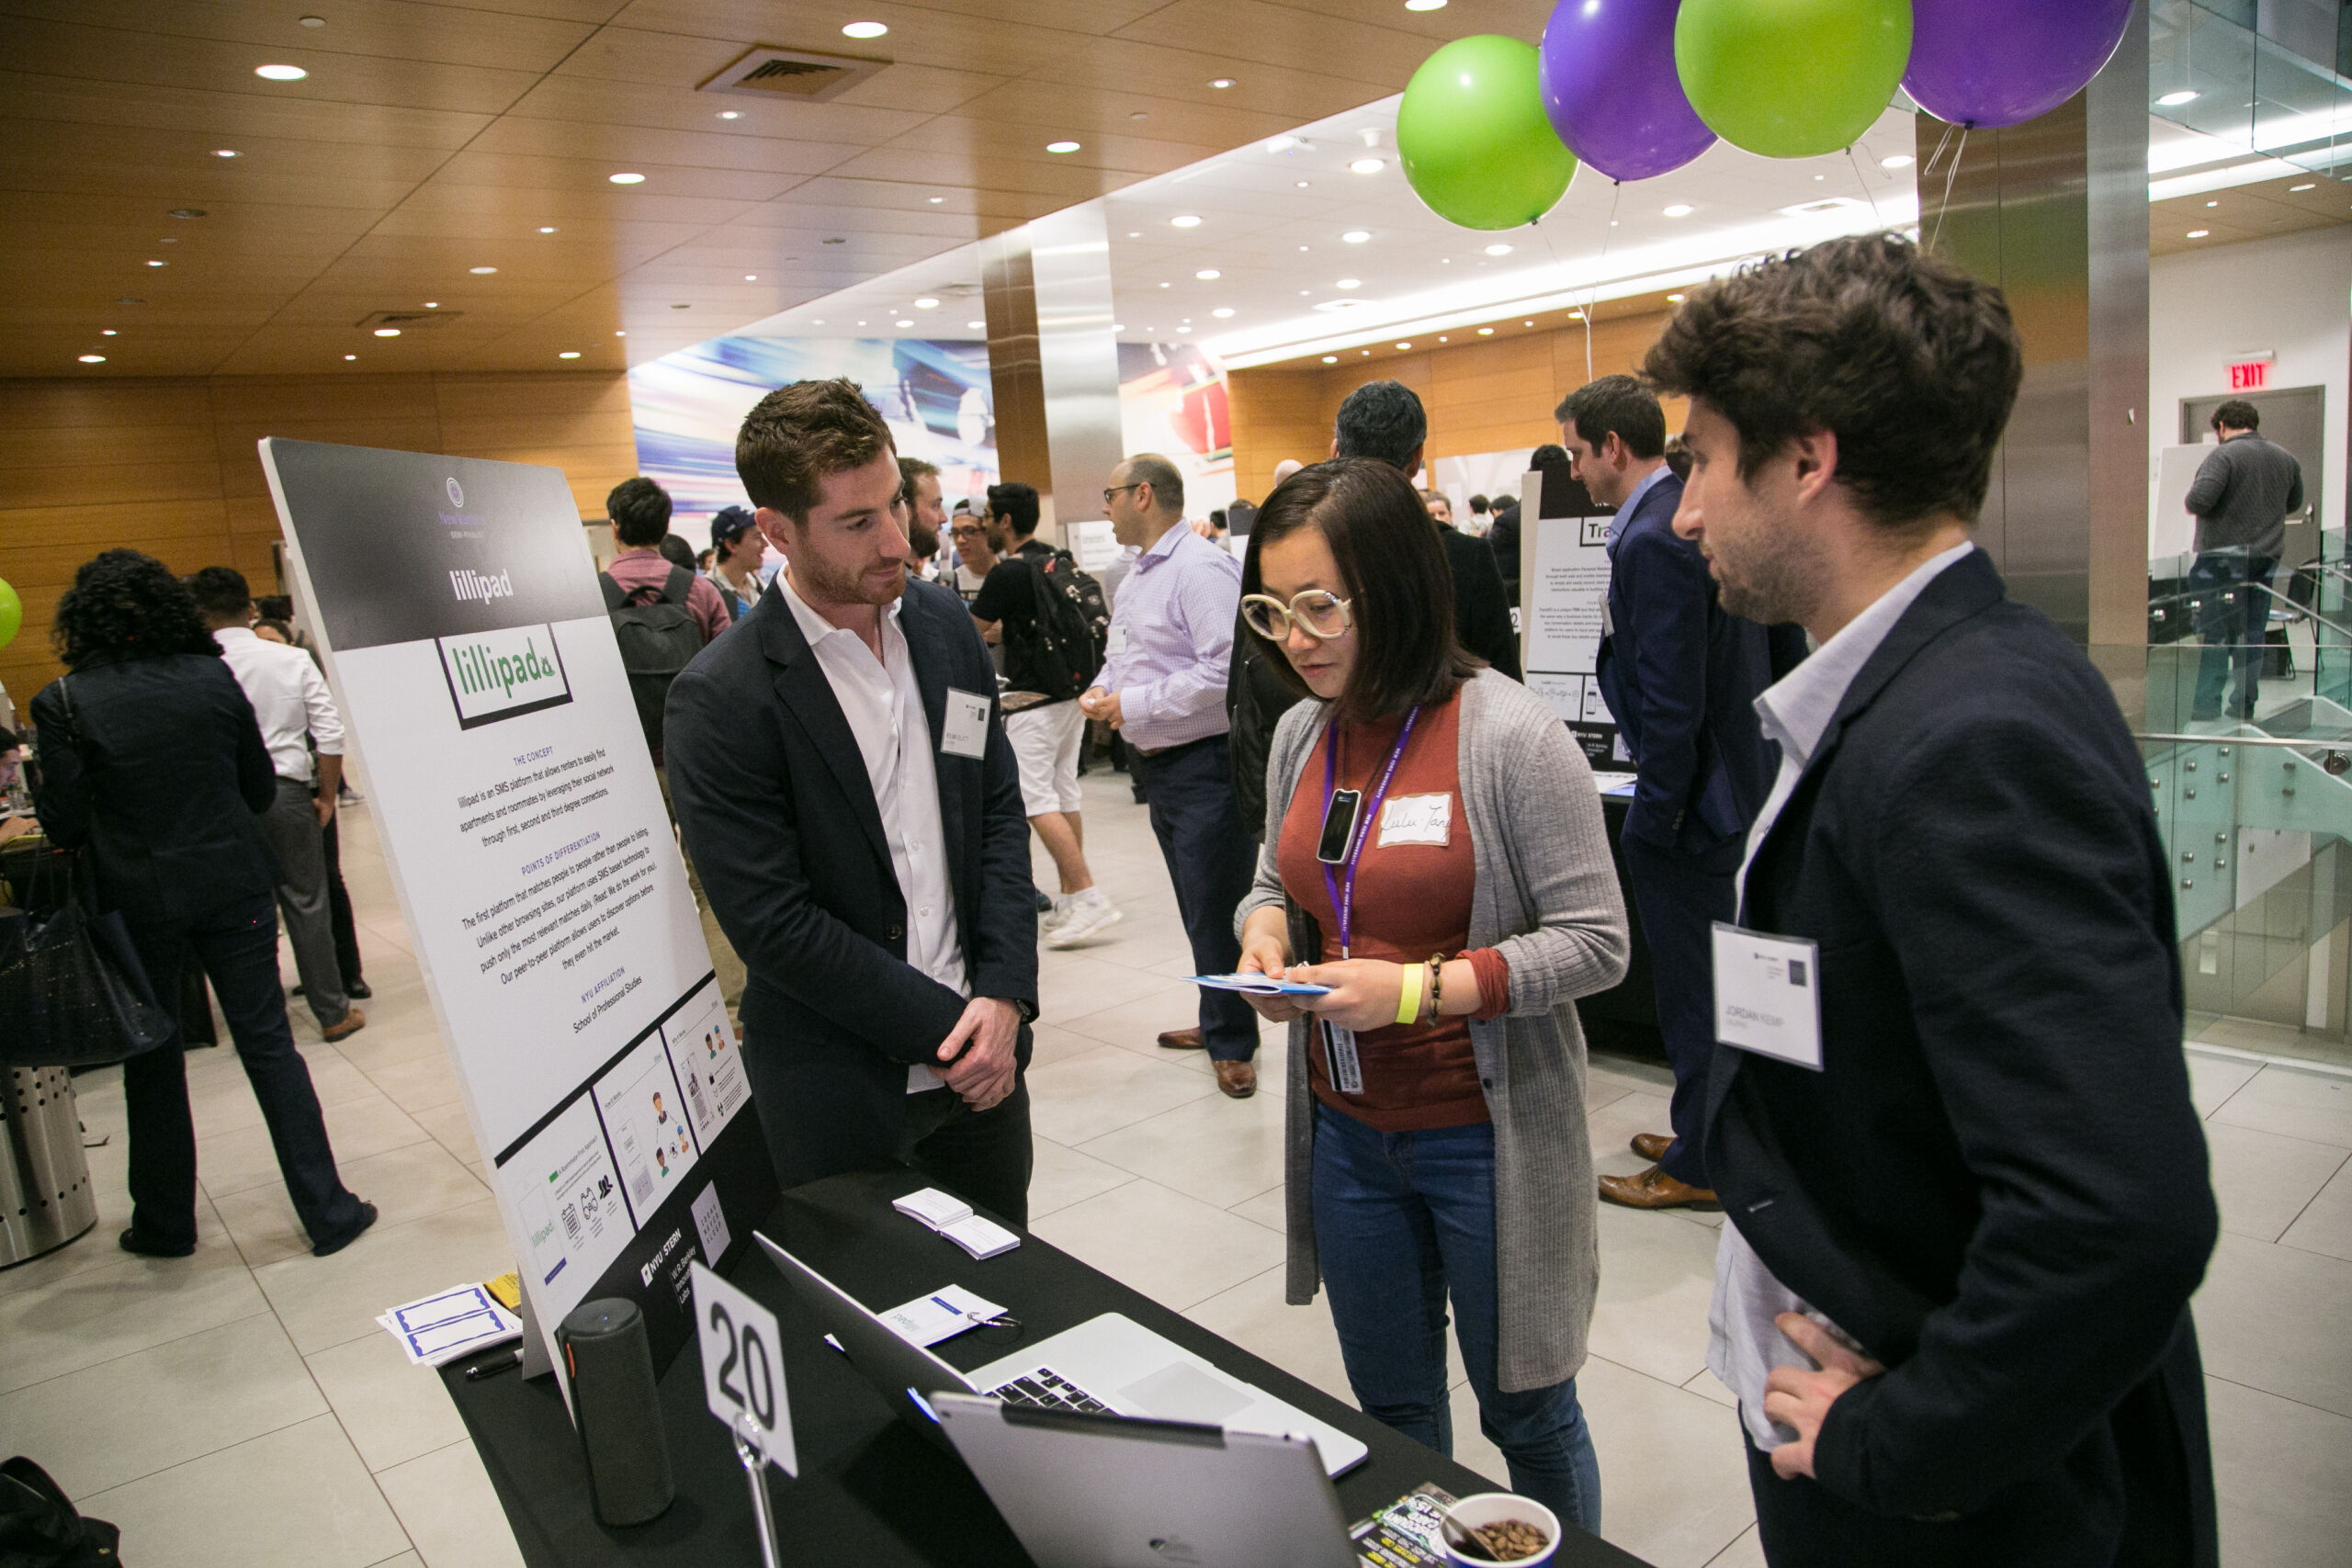 Event guests engaging with a startup at their presentation booth at the Venture Showcase.